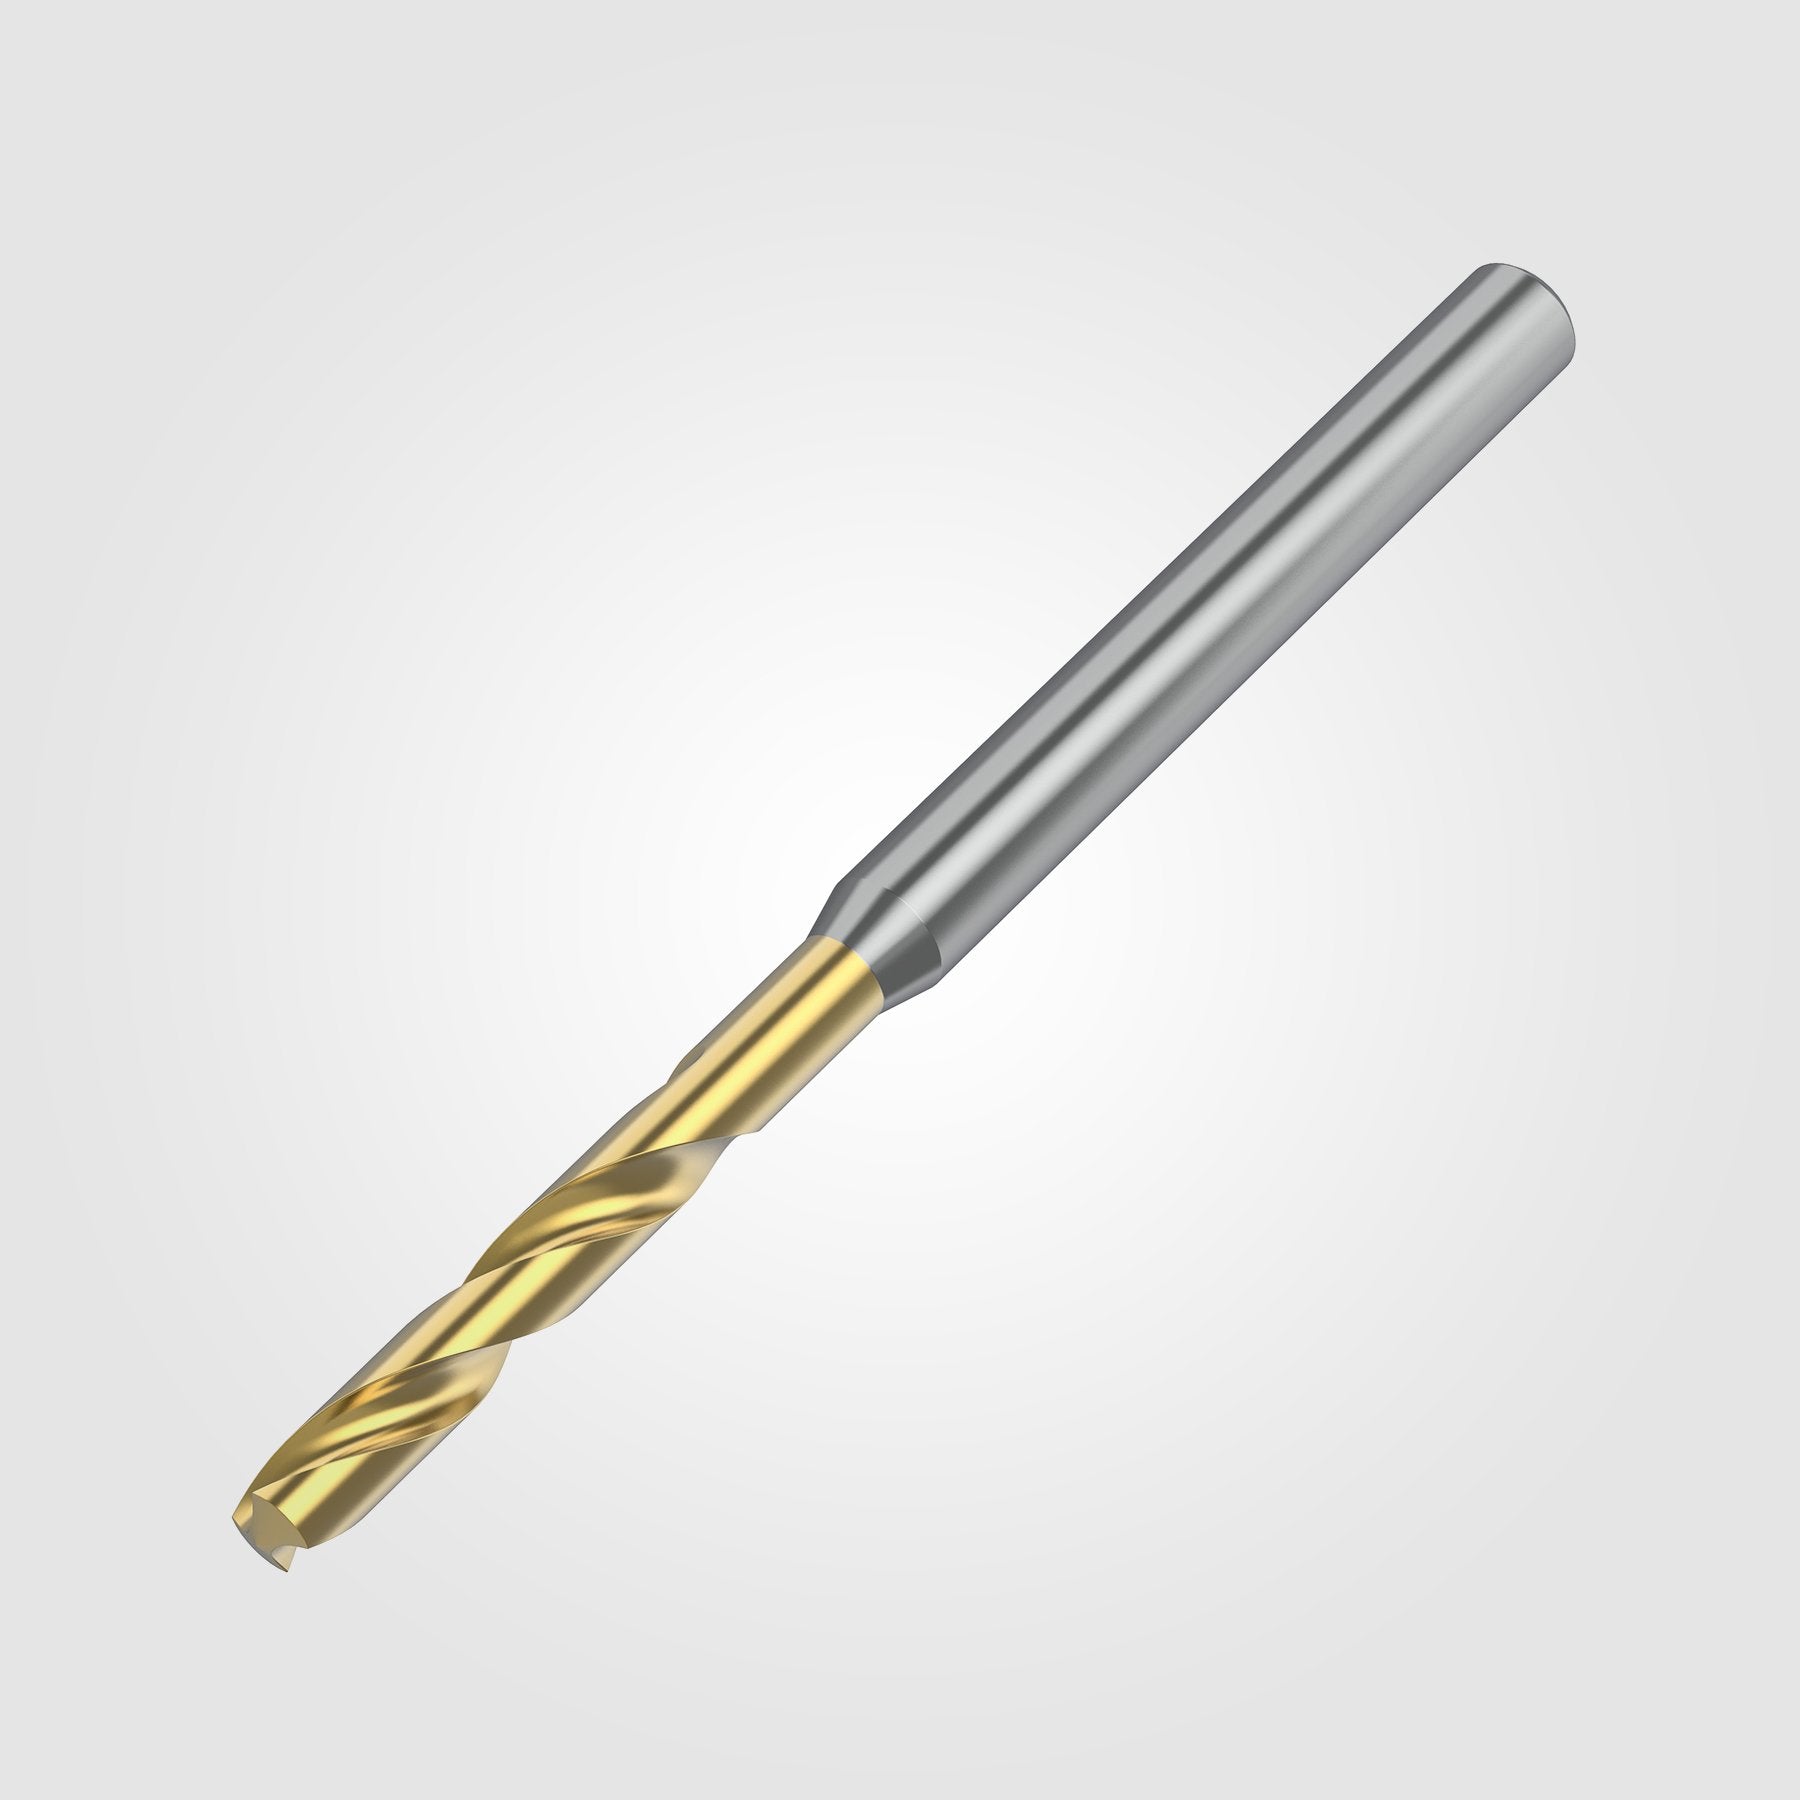 GOdrill (THROUGH COOLANT) | 18.5mm / .7283" / 3xD | SOLID CARBIDE DRILL | 4148481